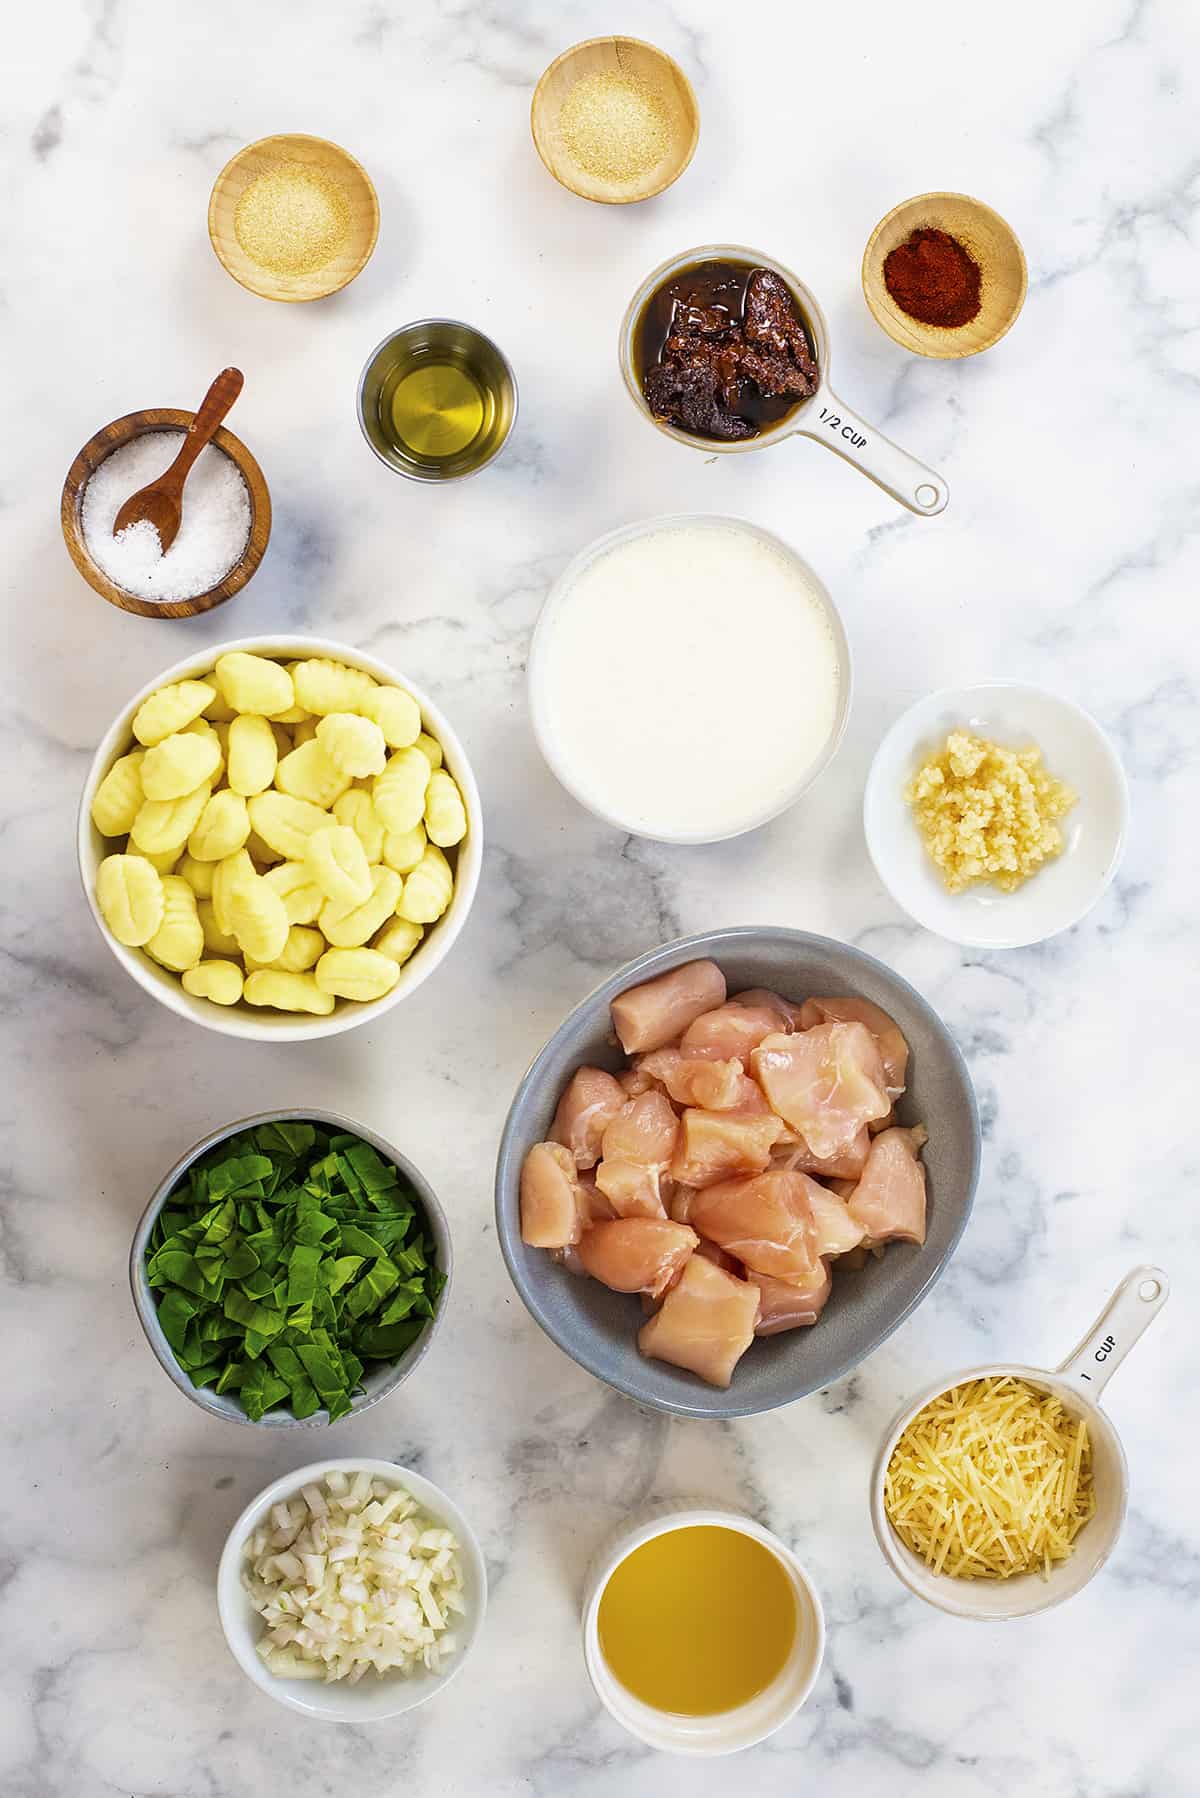 Ingredients for Tuscan chicken and gnocchi recipe.